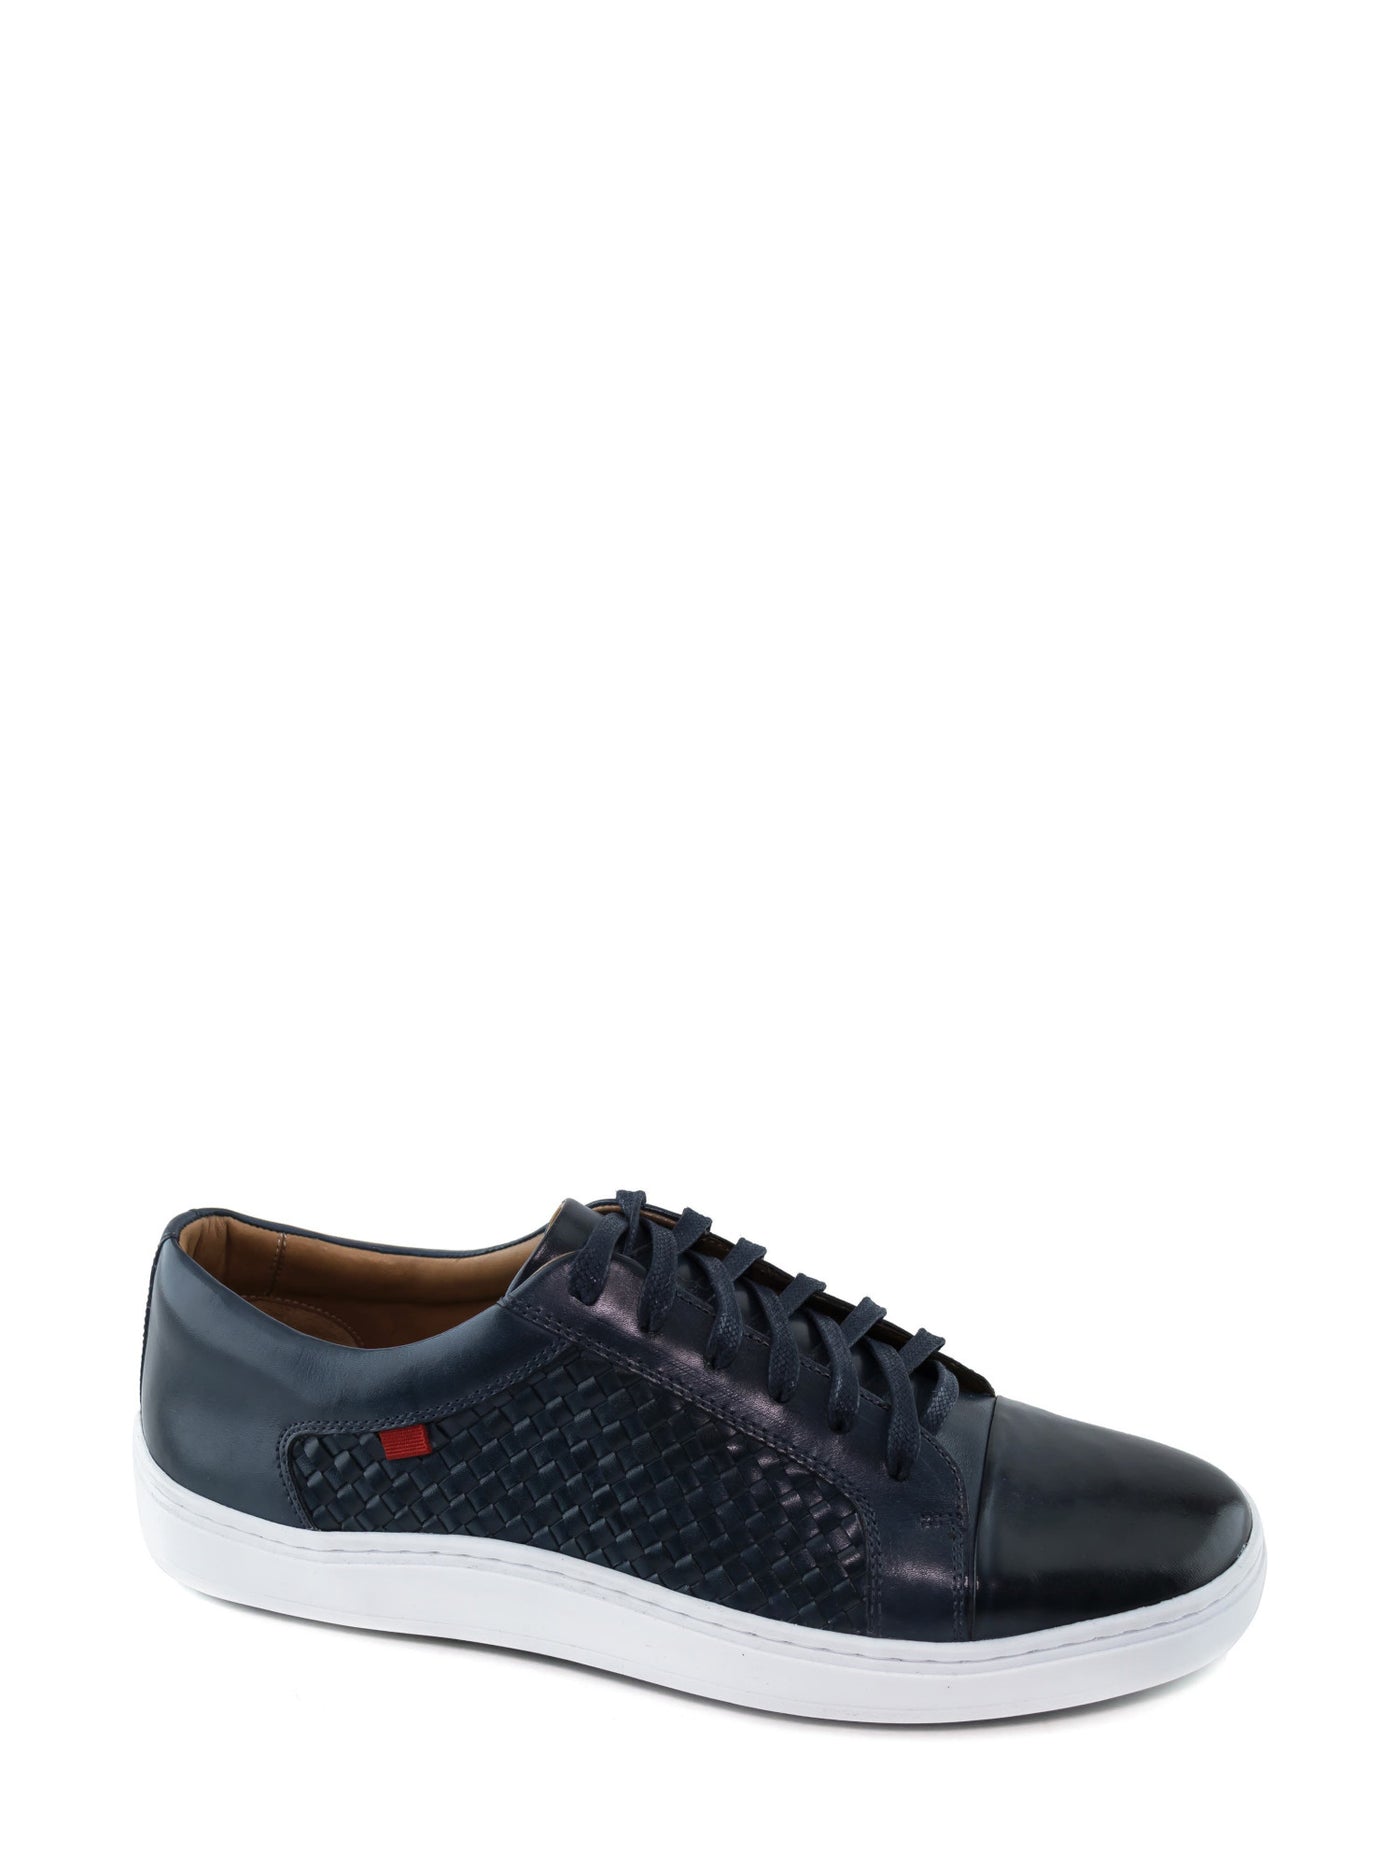 MARC JOSEPH NEW YORK Mens Navy King Street Round Toe Platform Lace-Up Leather Athletic Sneakers Shoes 10